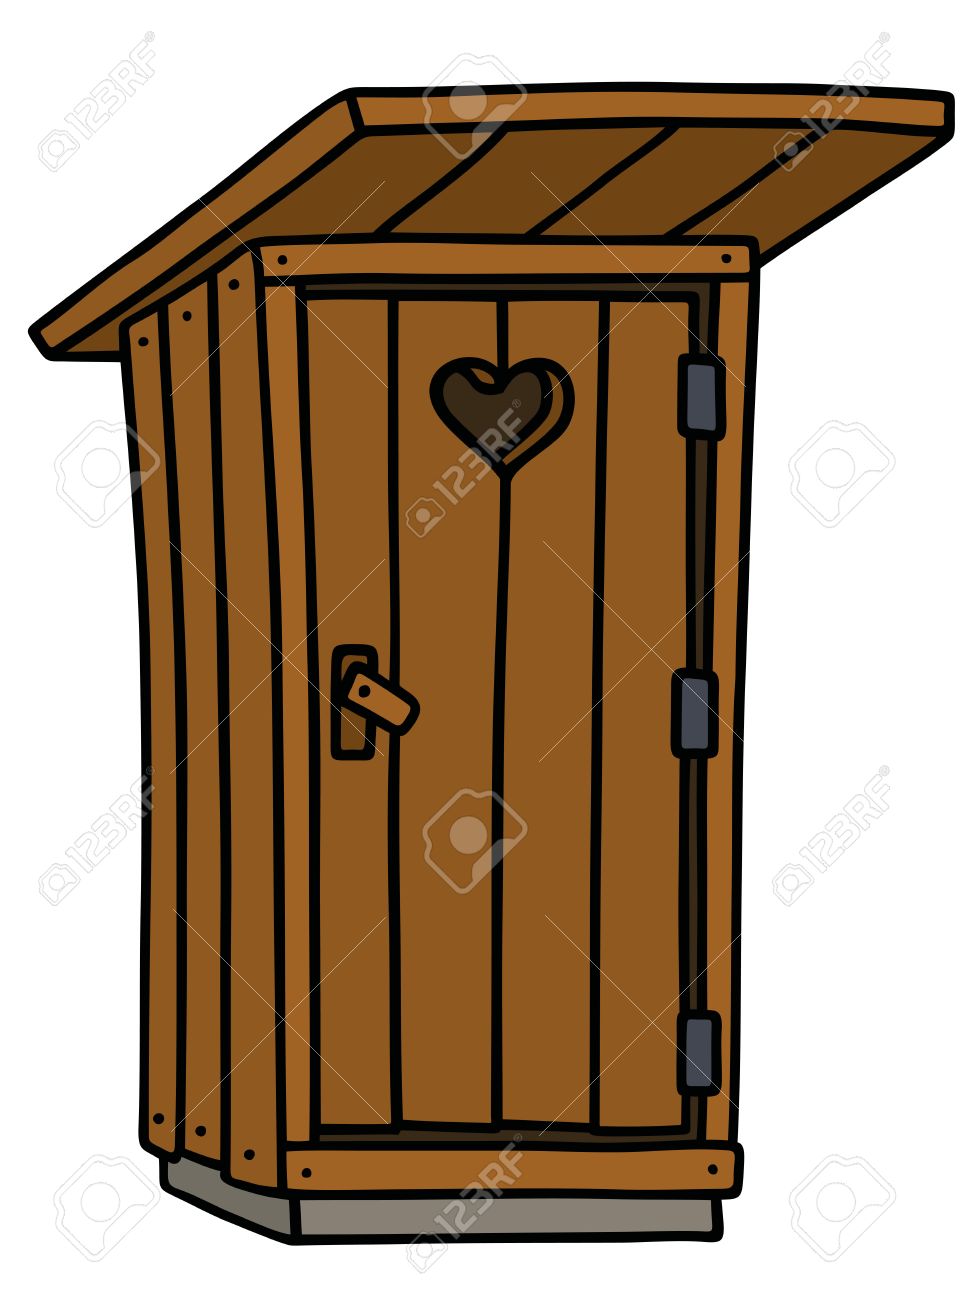 Hand Drawing Of A Funny Old Wooden Latrine Shack Royalty Free.